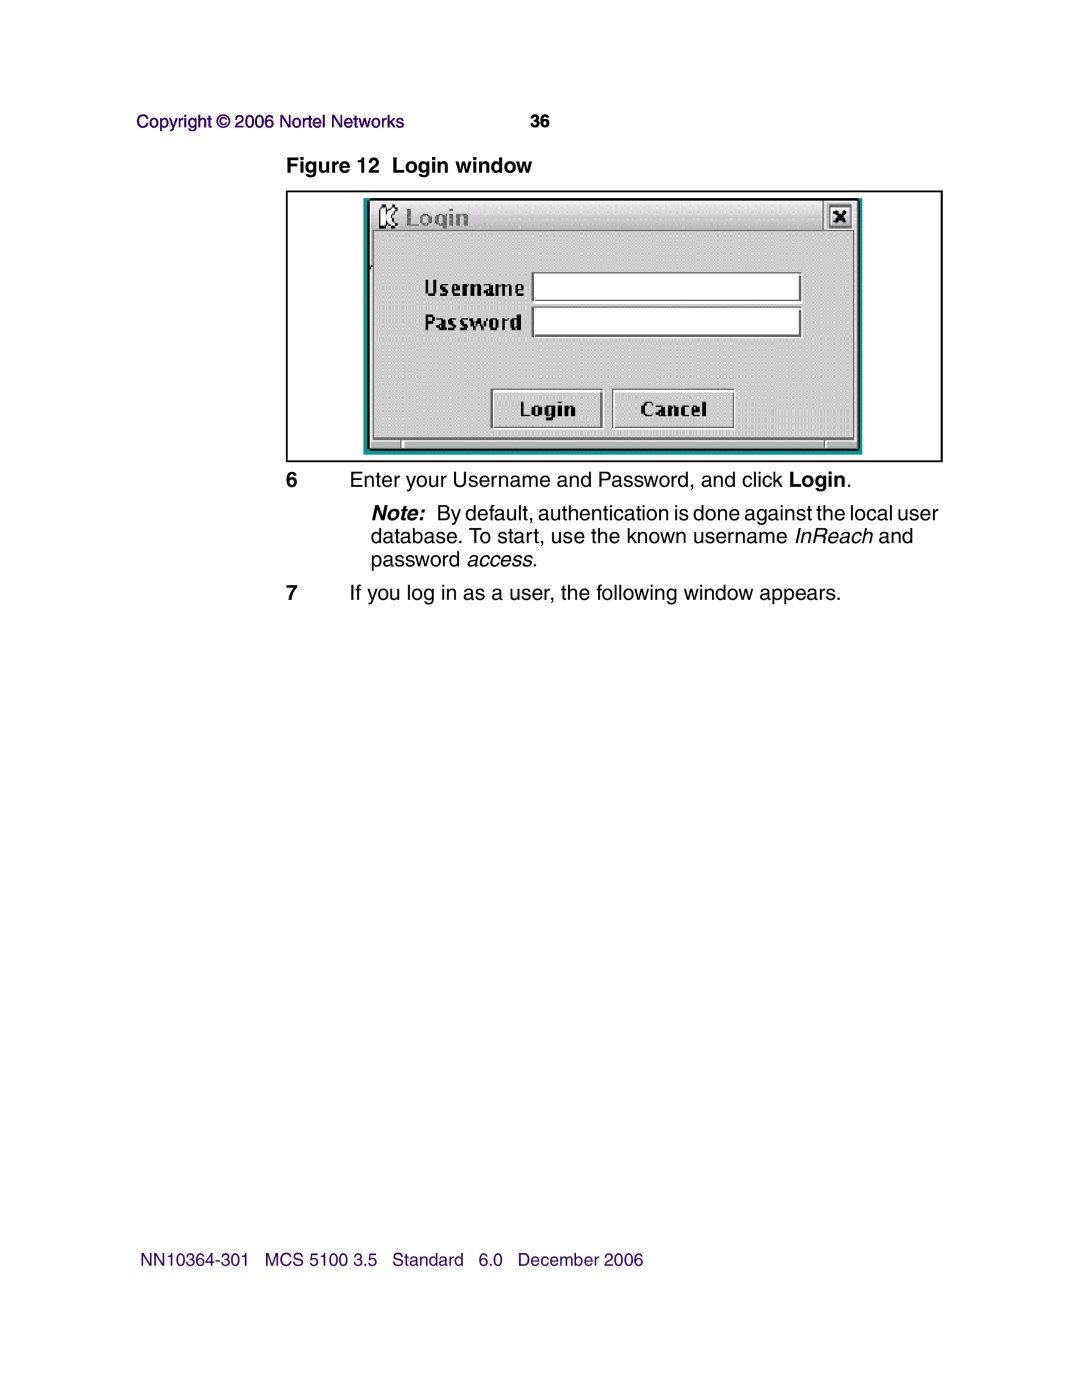 Nortel Networks V100 manual Login window, Enter your Username and Password, and click Login, Copyright 2006 Nortel Networks 